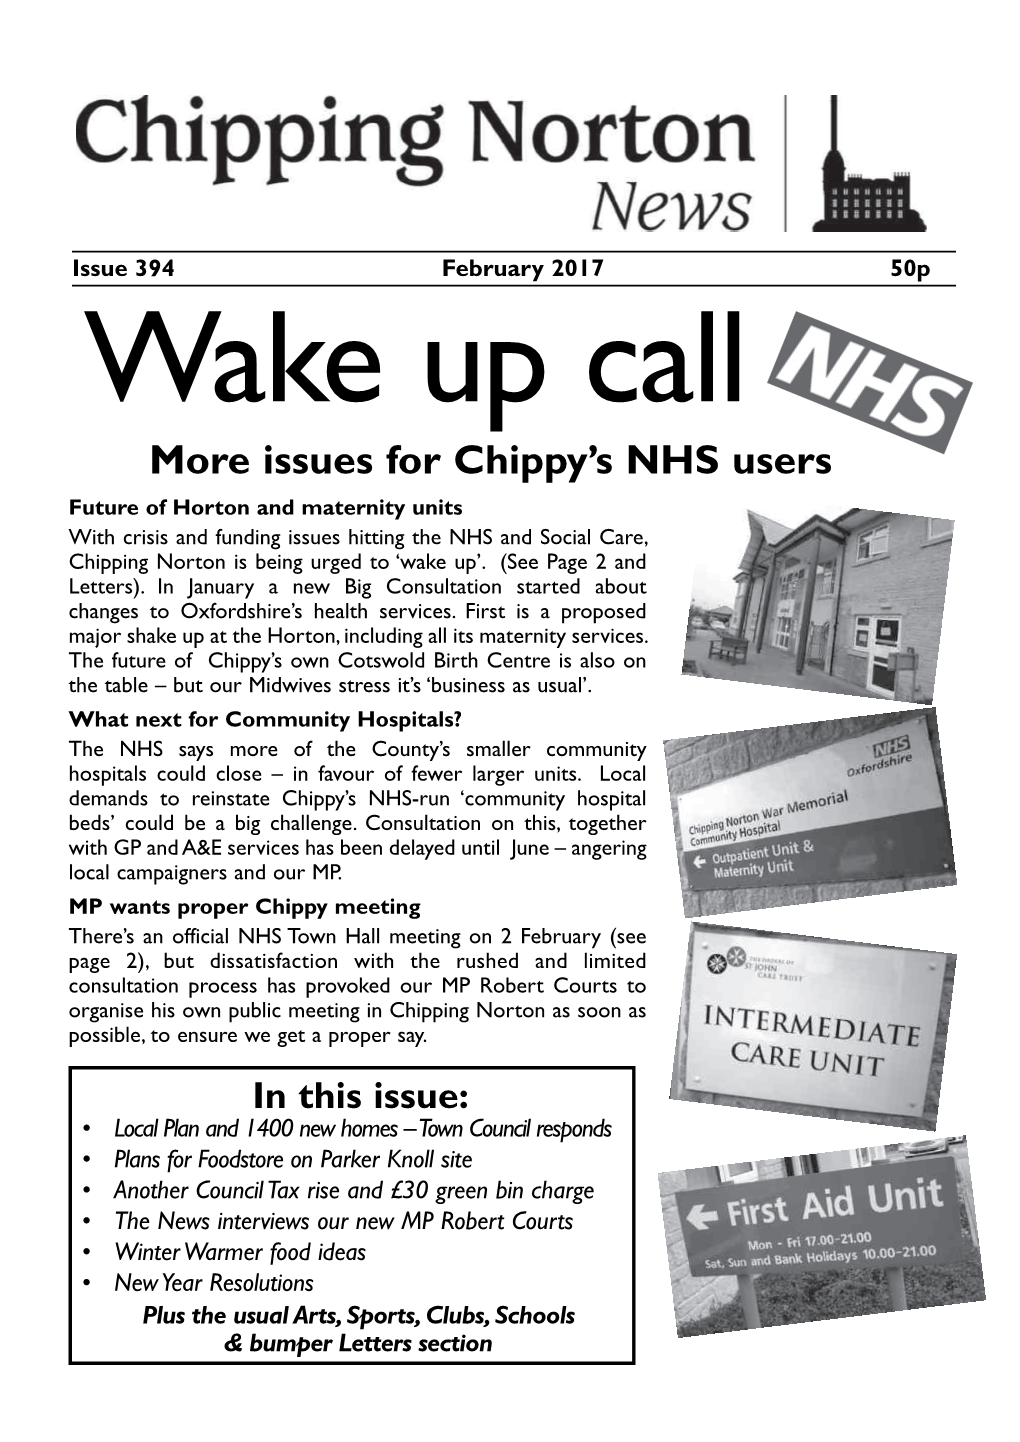 Issues for Chippy's NHS Users